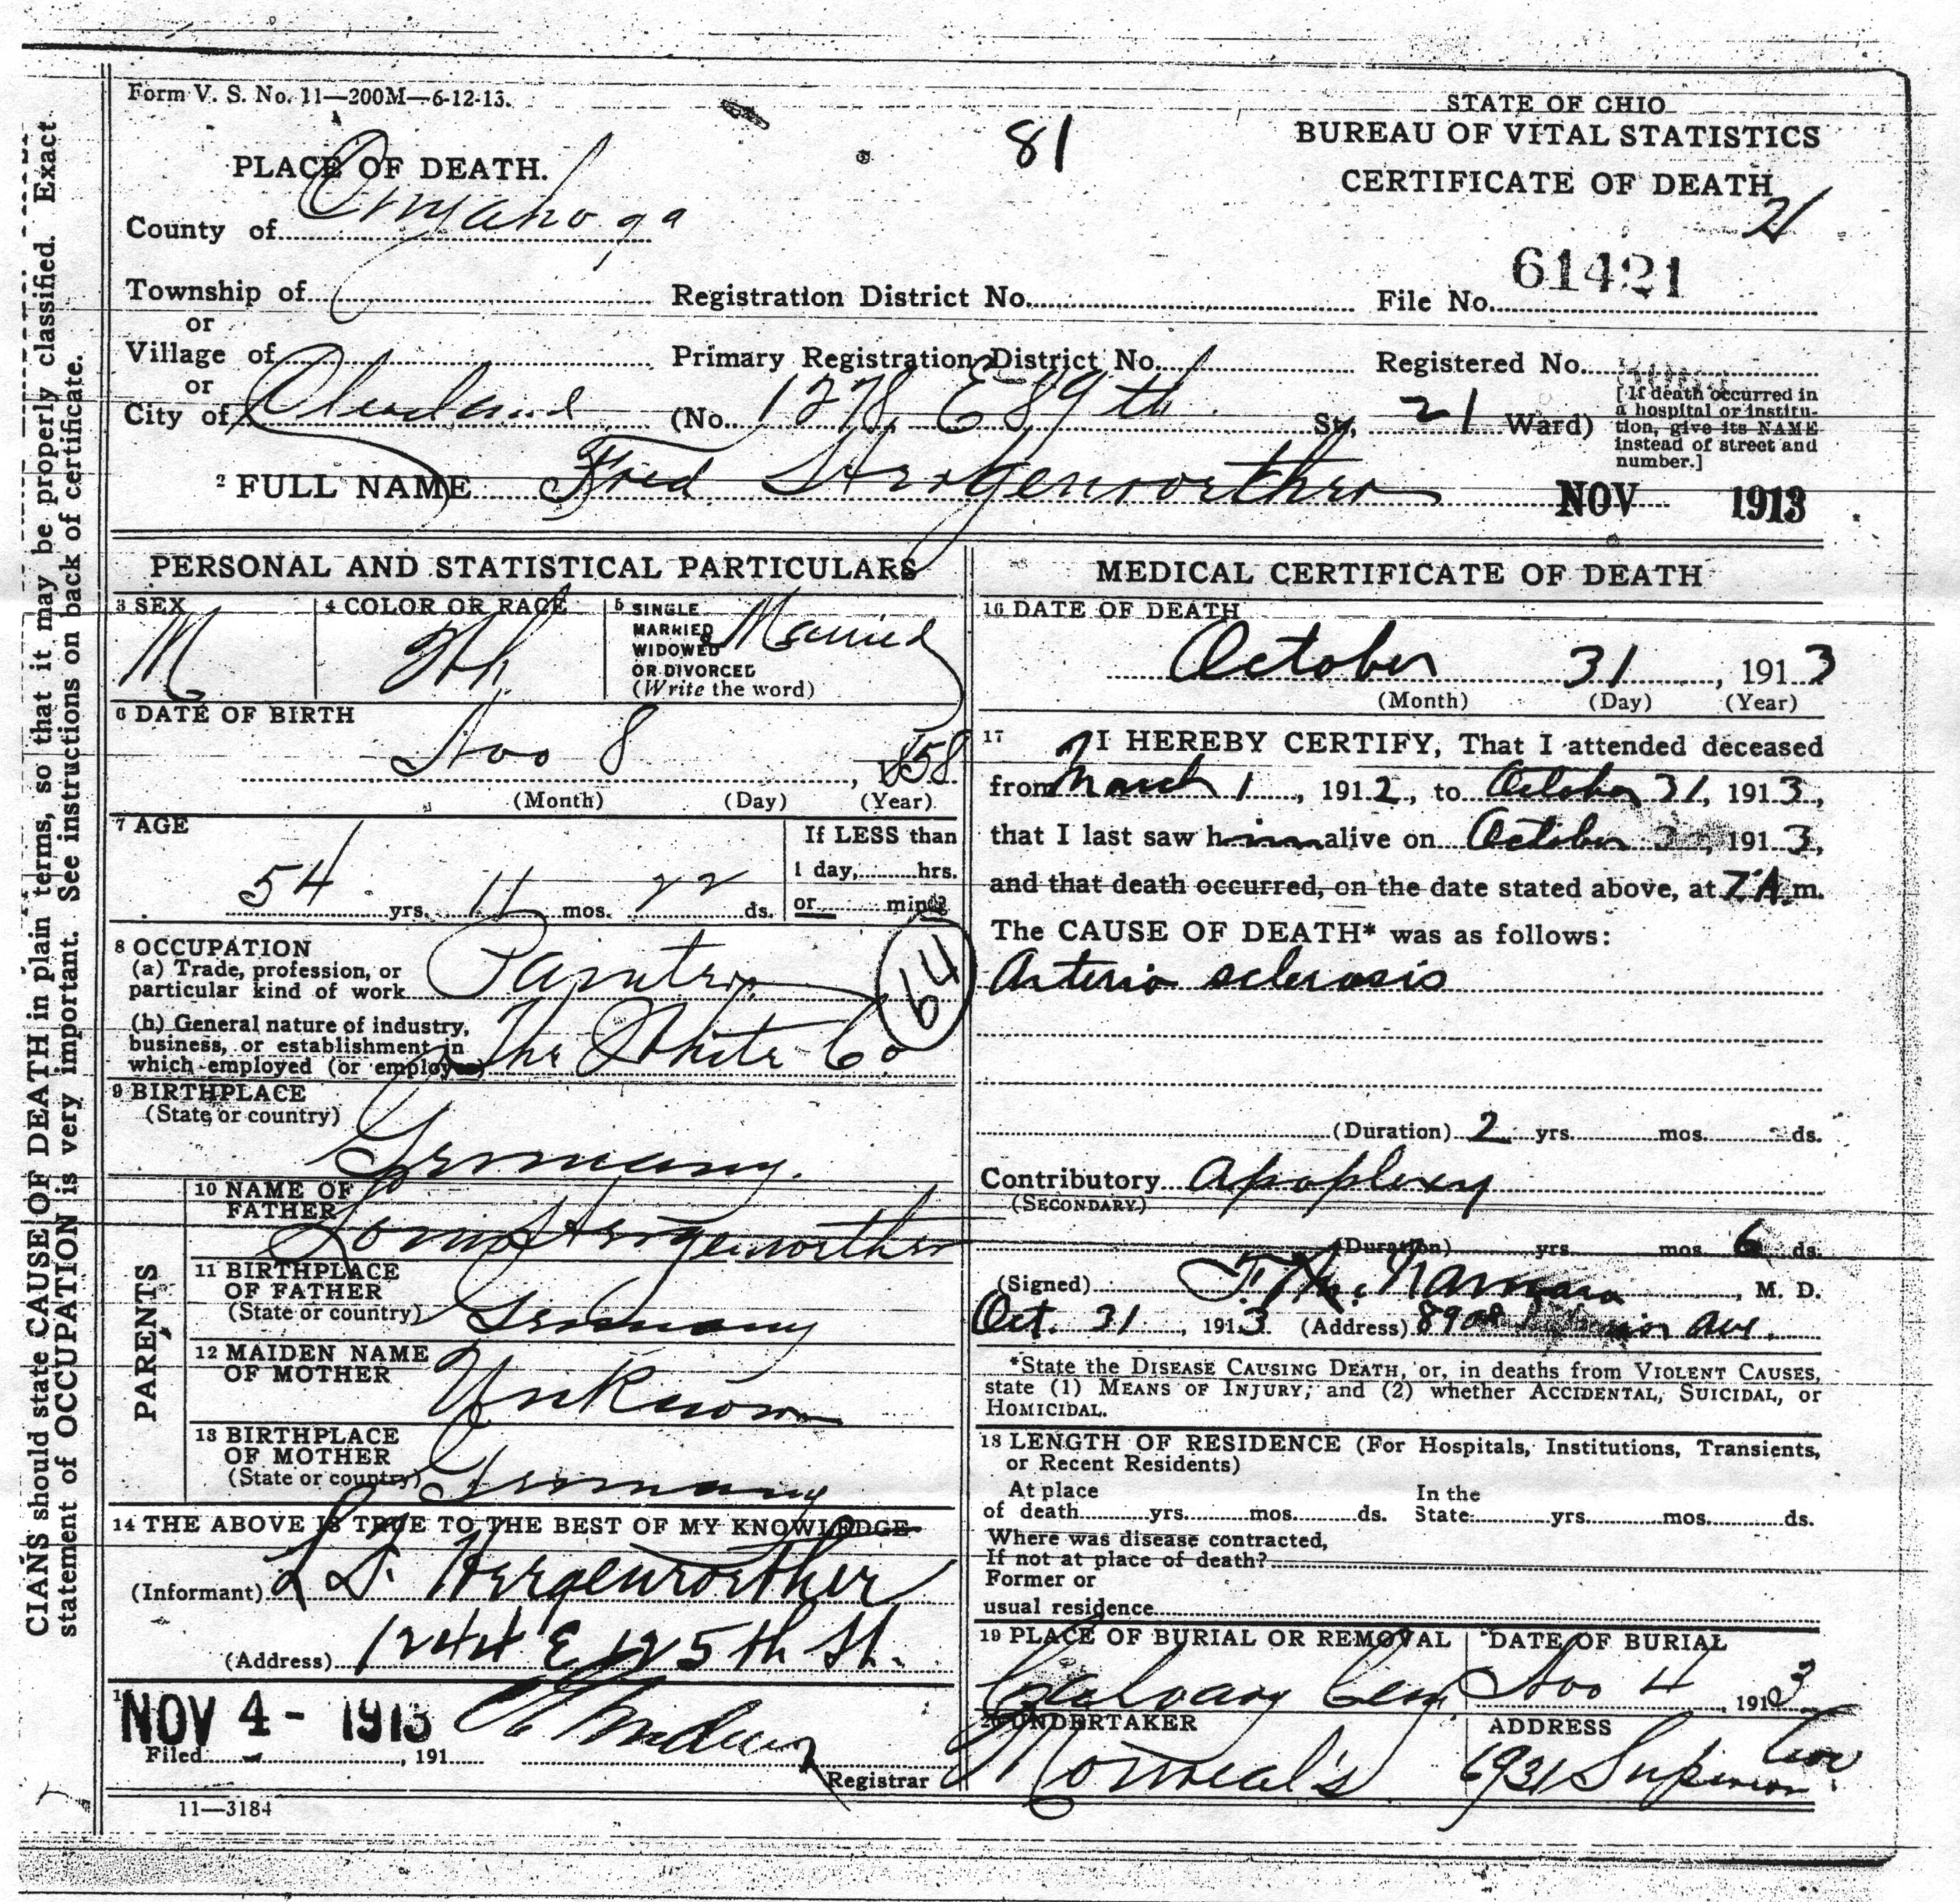 Fred Hergenrother's Death Certificate